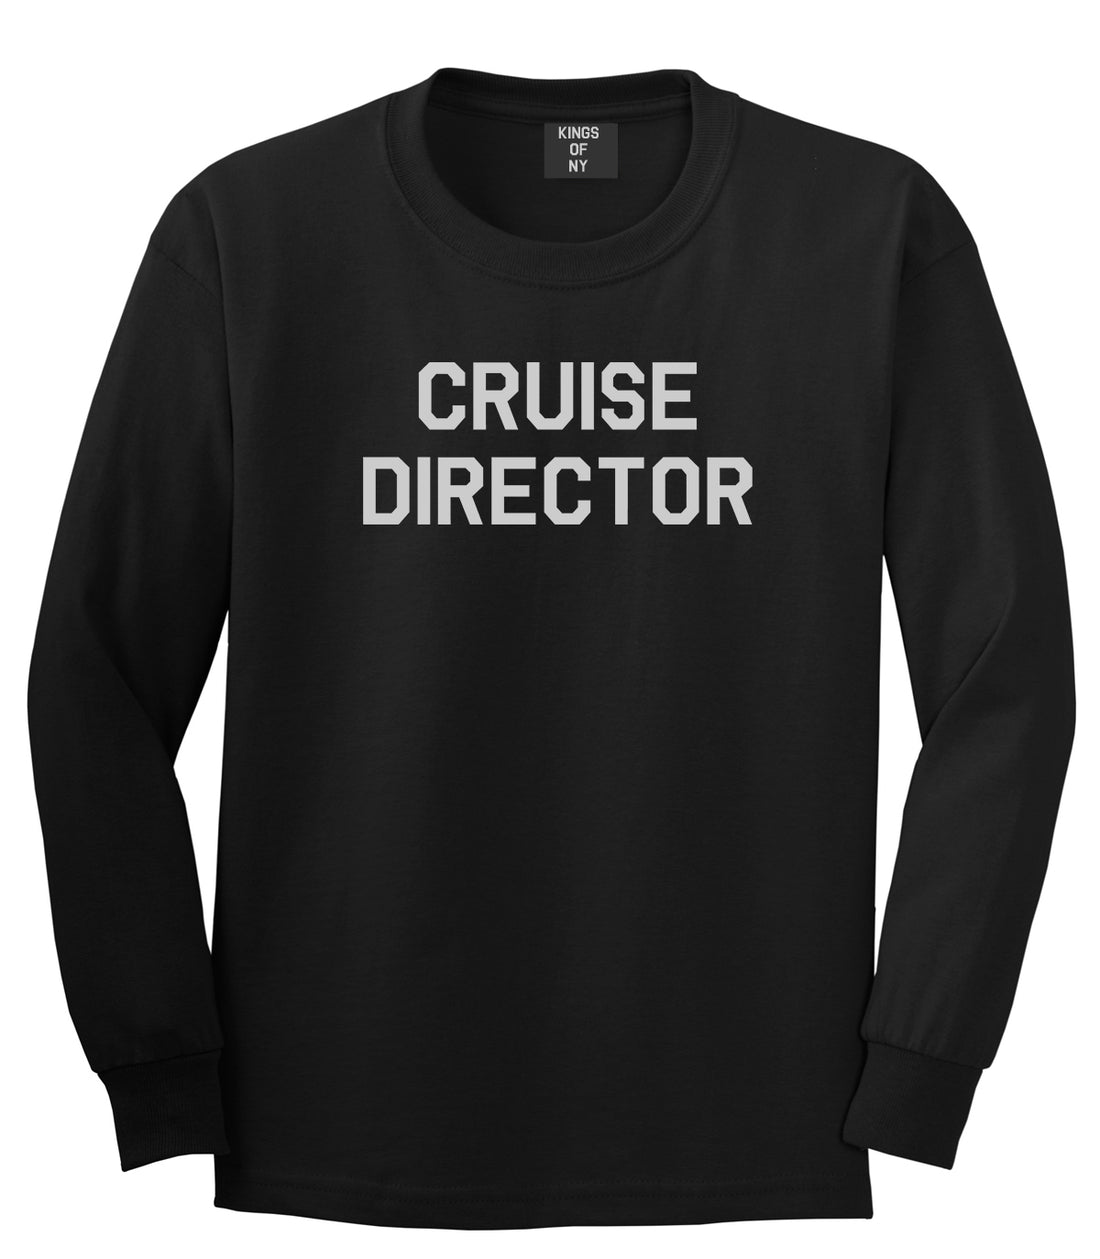 Cruise Director Mens Black Long Sleeve T-Shirt by Kings Of NY